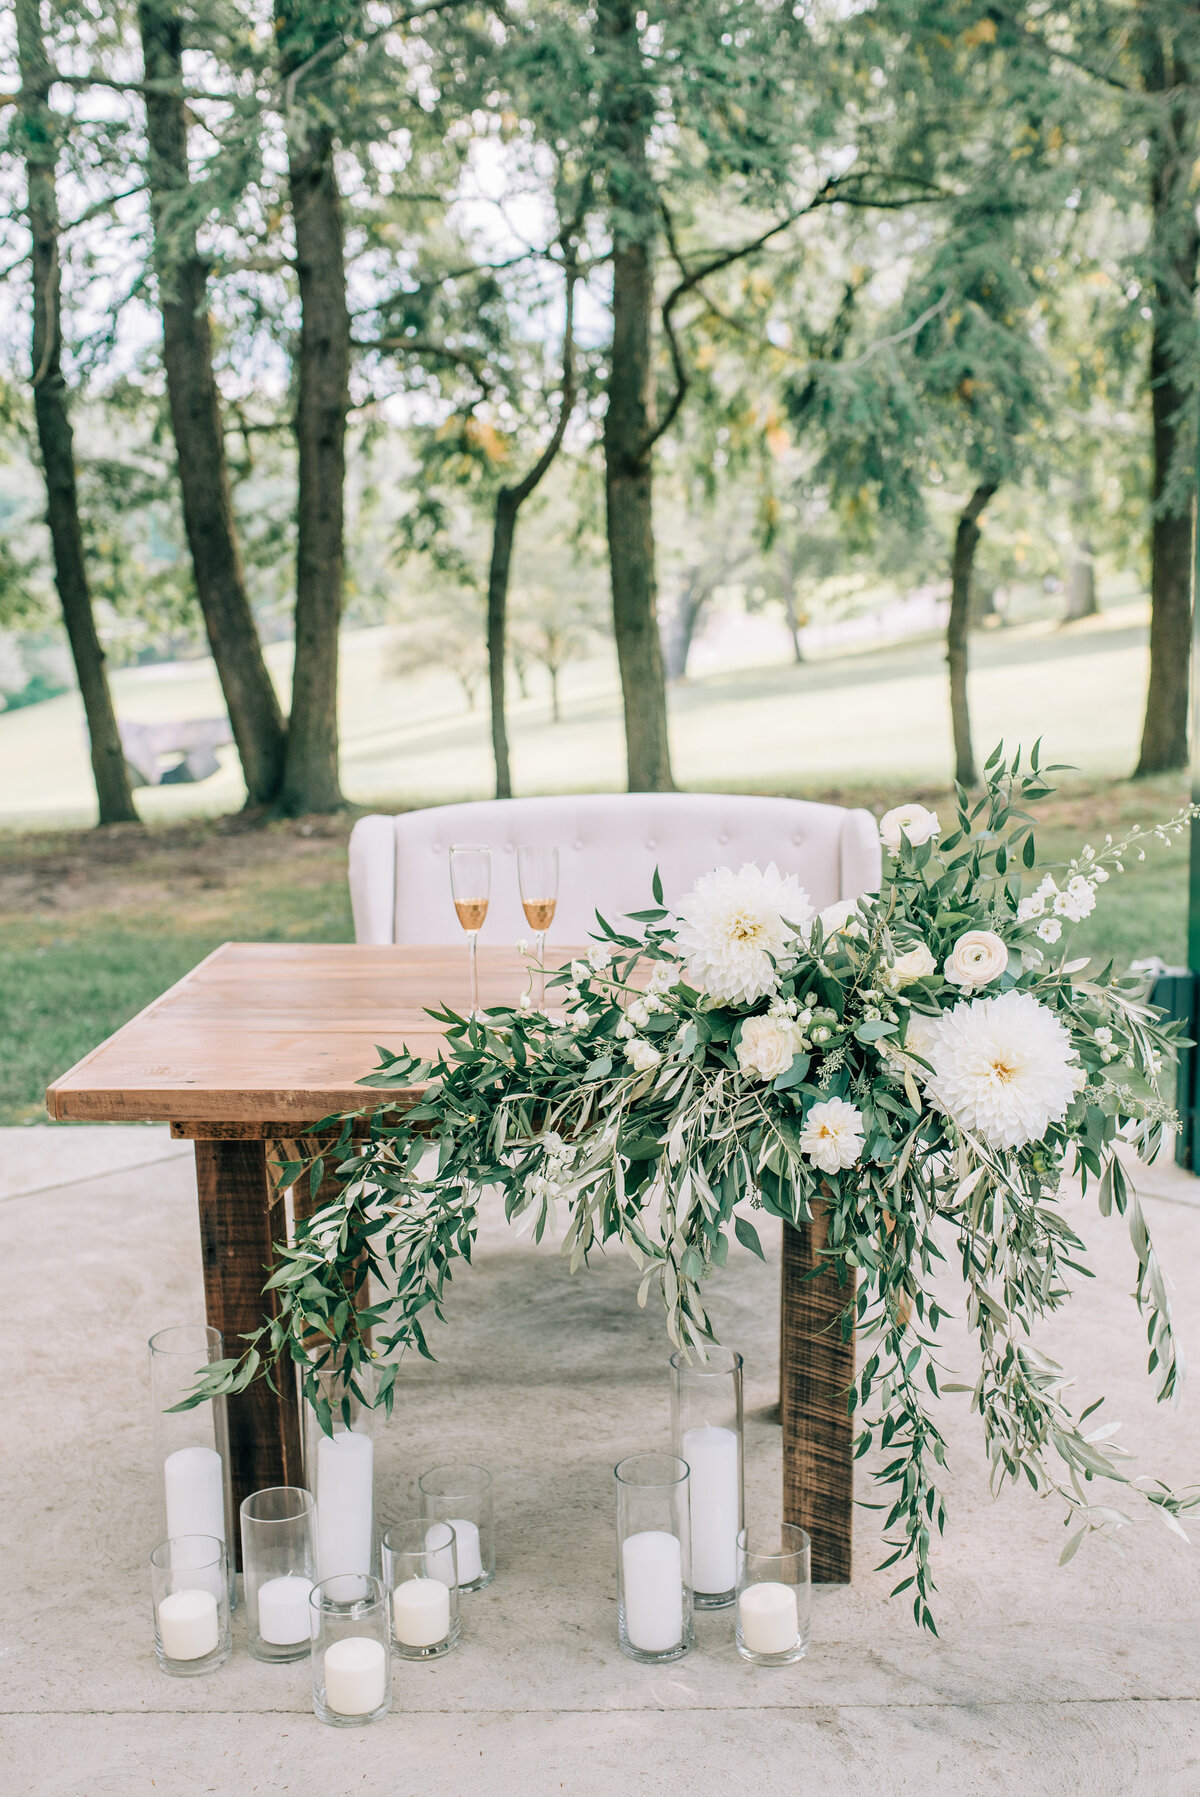 farmers daughter's floral installment at sweetheart table- hartwood acres estate